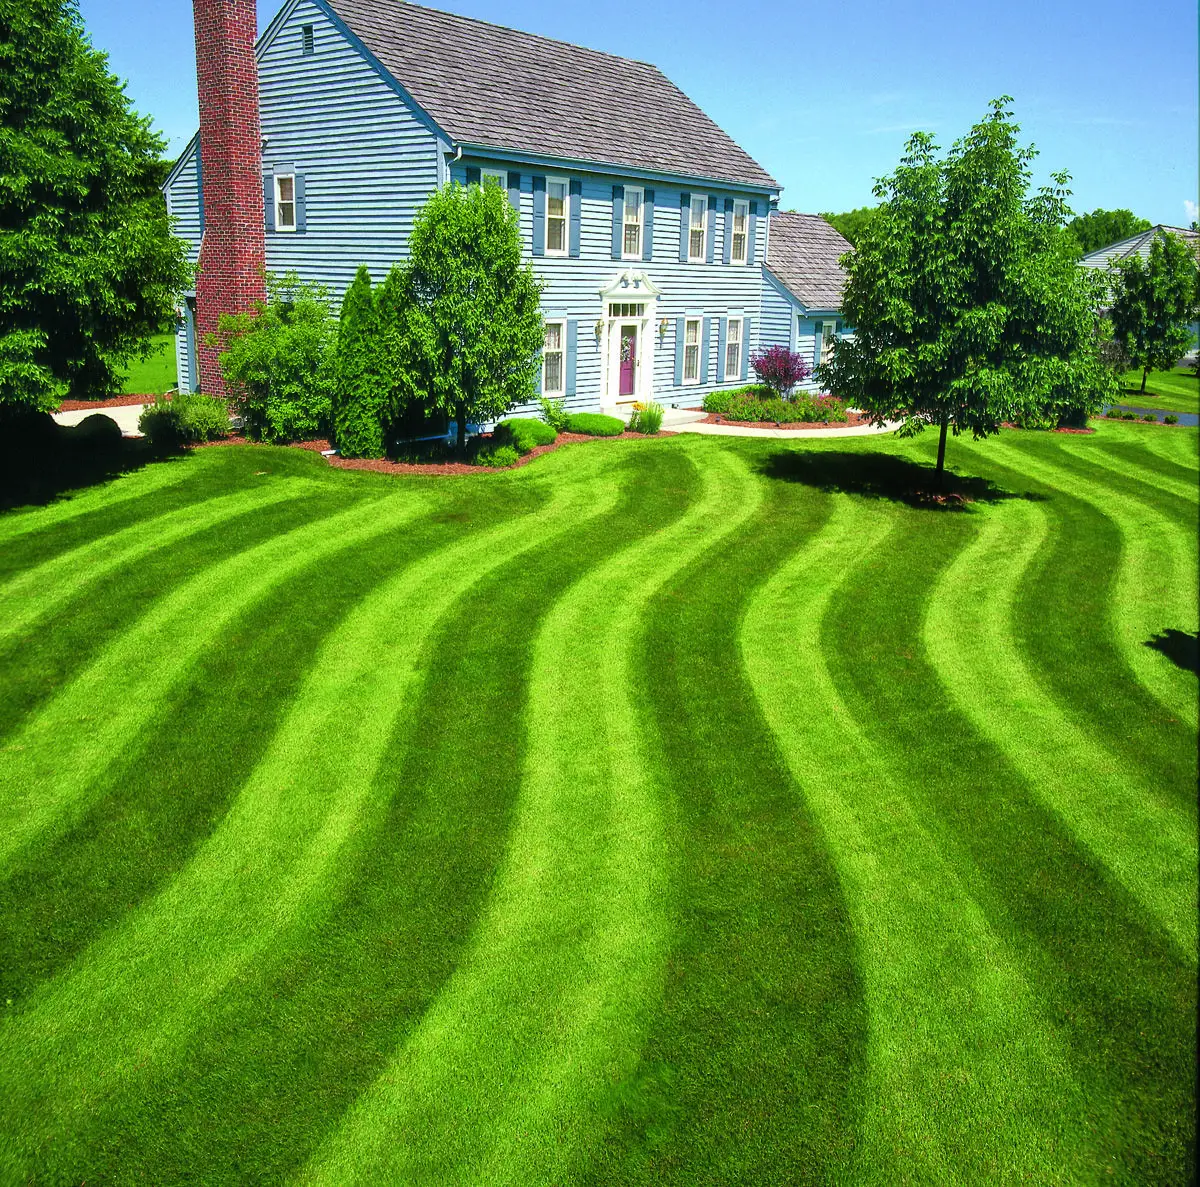 Landscaping tips: how to create striping patterns in your lawn for a ...